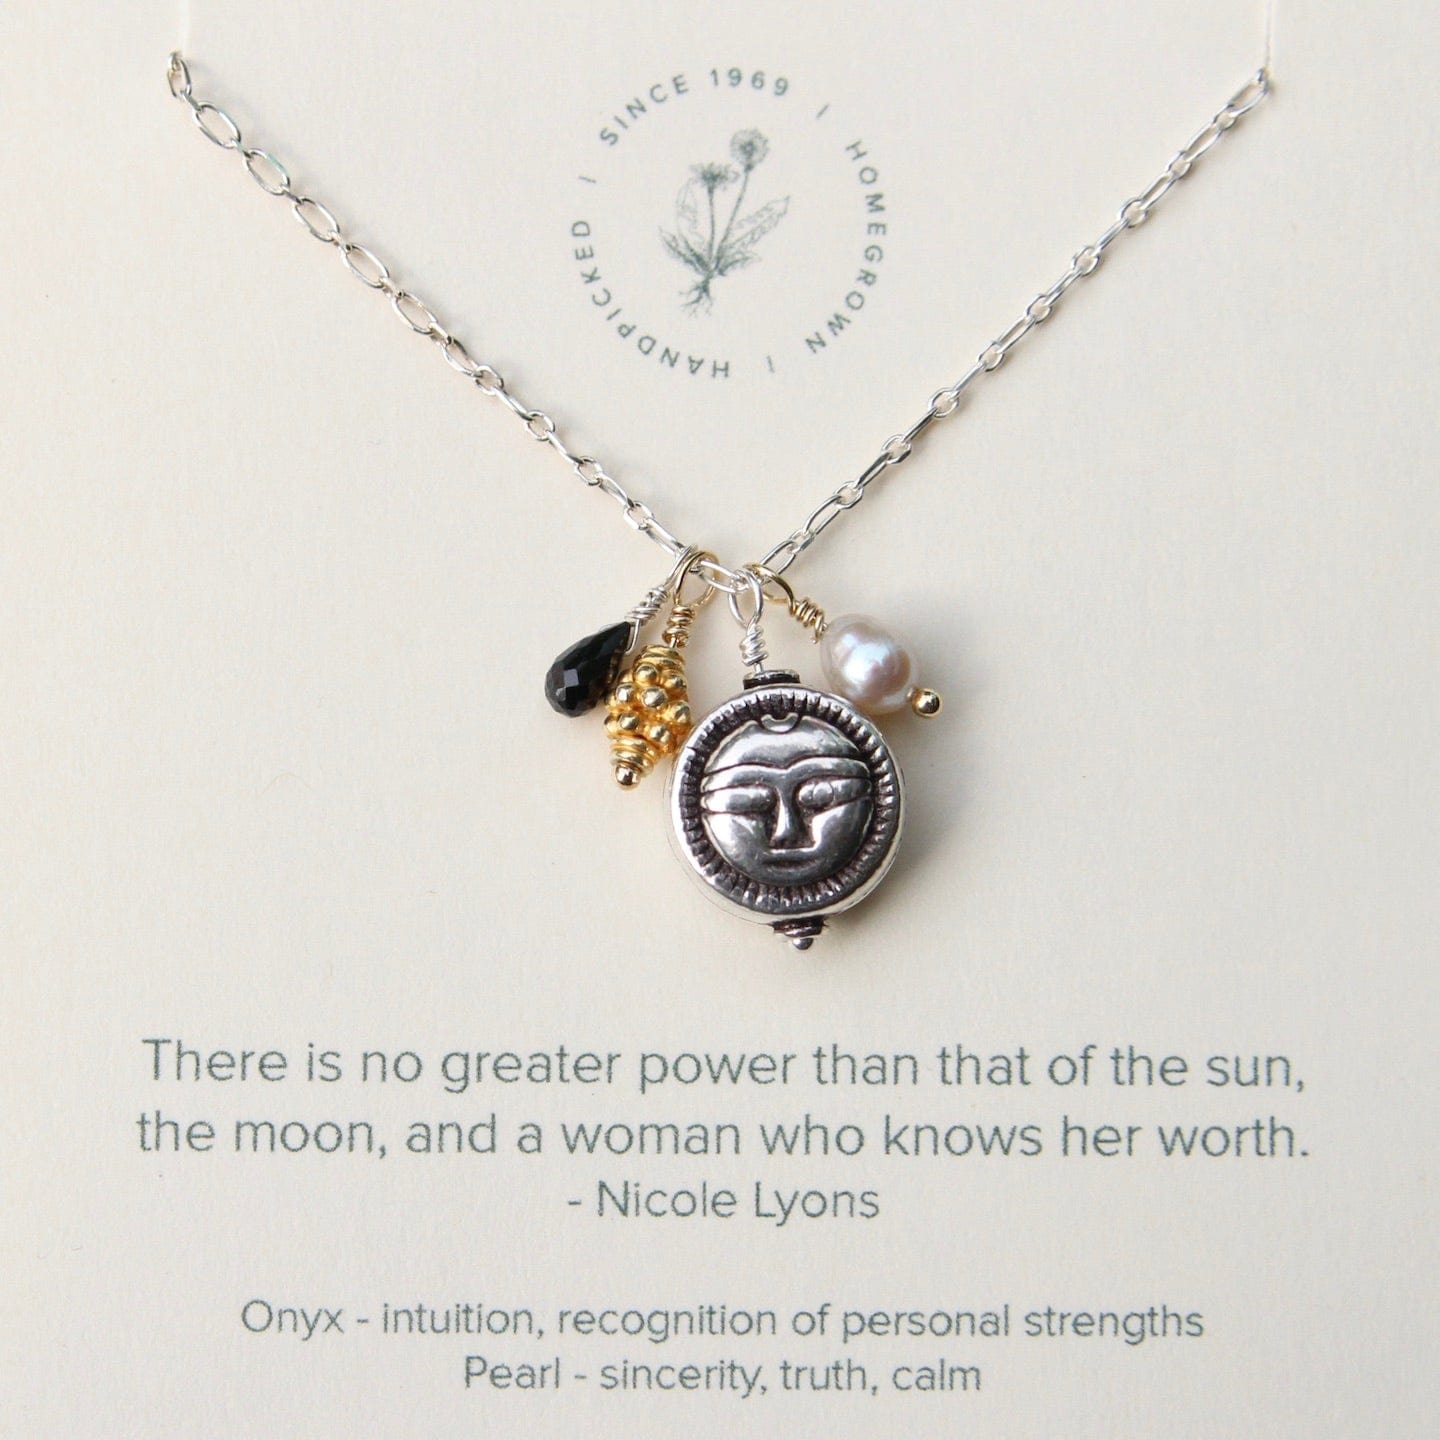 Moon necklace pendant - Hairy Growler - The silver Moon (tells you a secret)